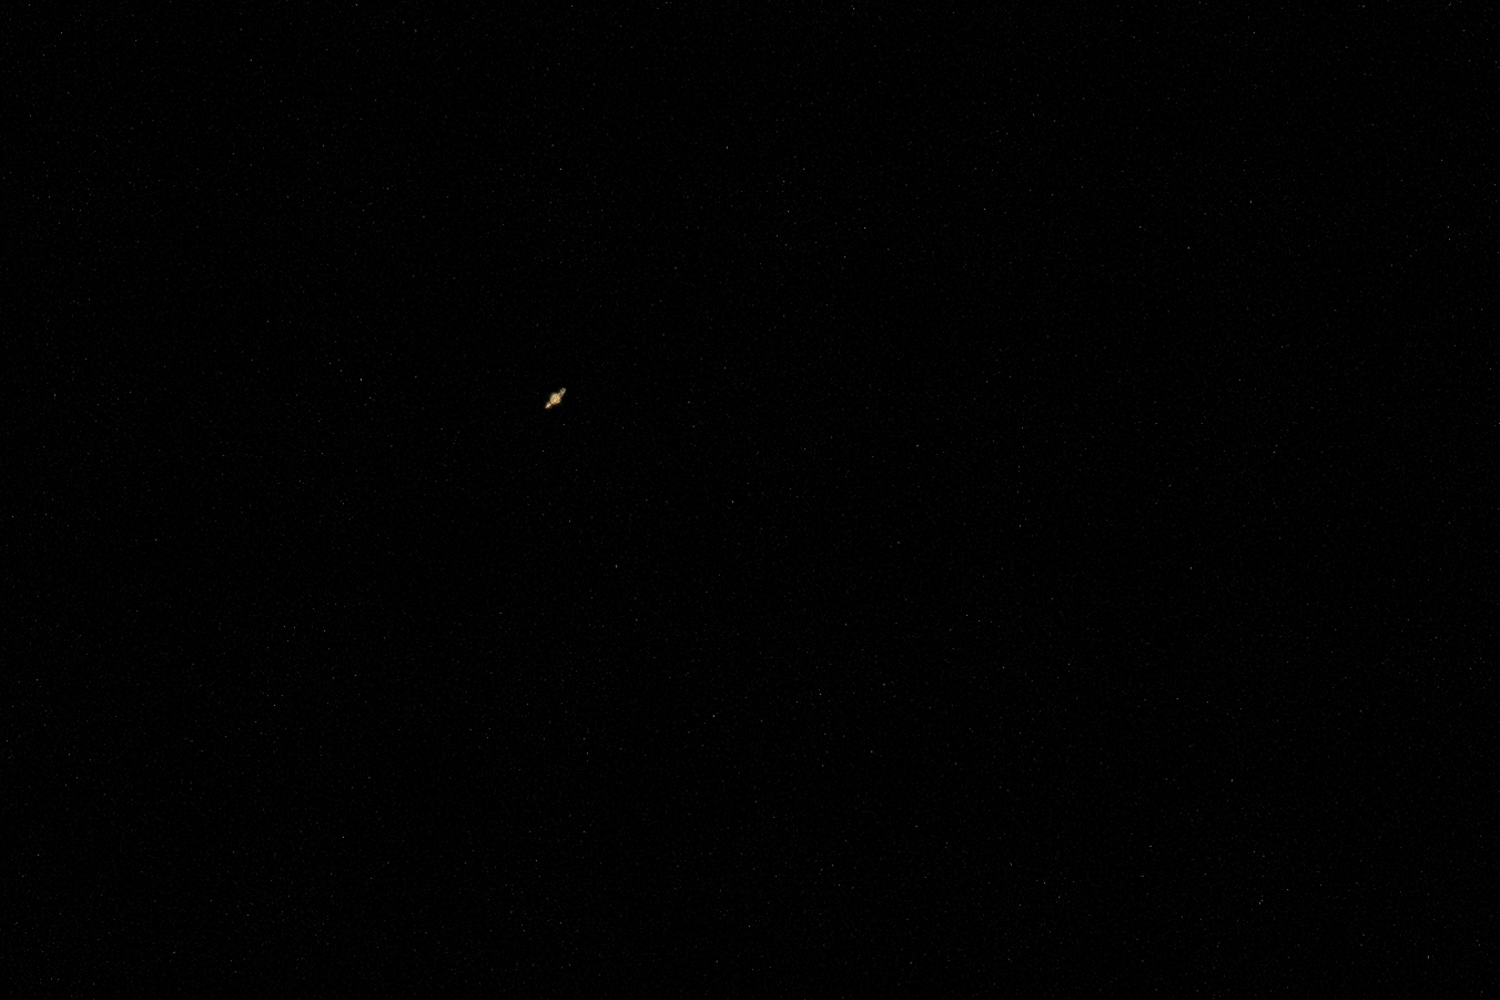 The author used the additional magnification of the 1.6x extender to view Saturn in the night sky.